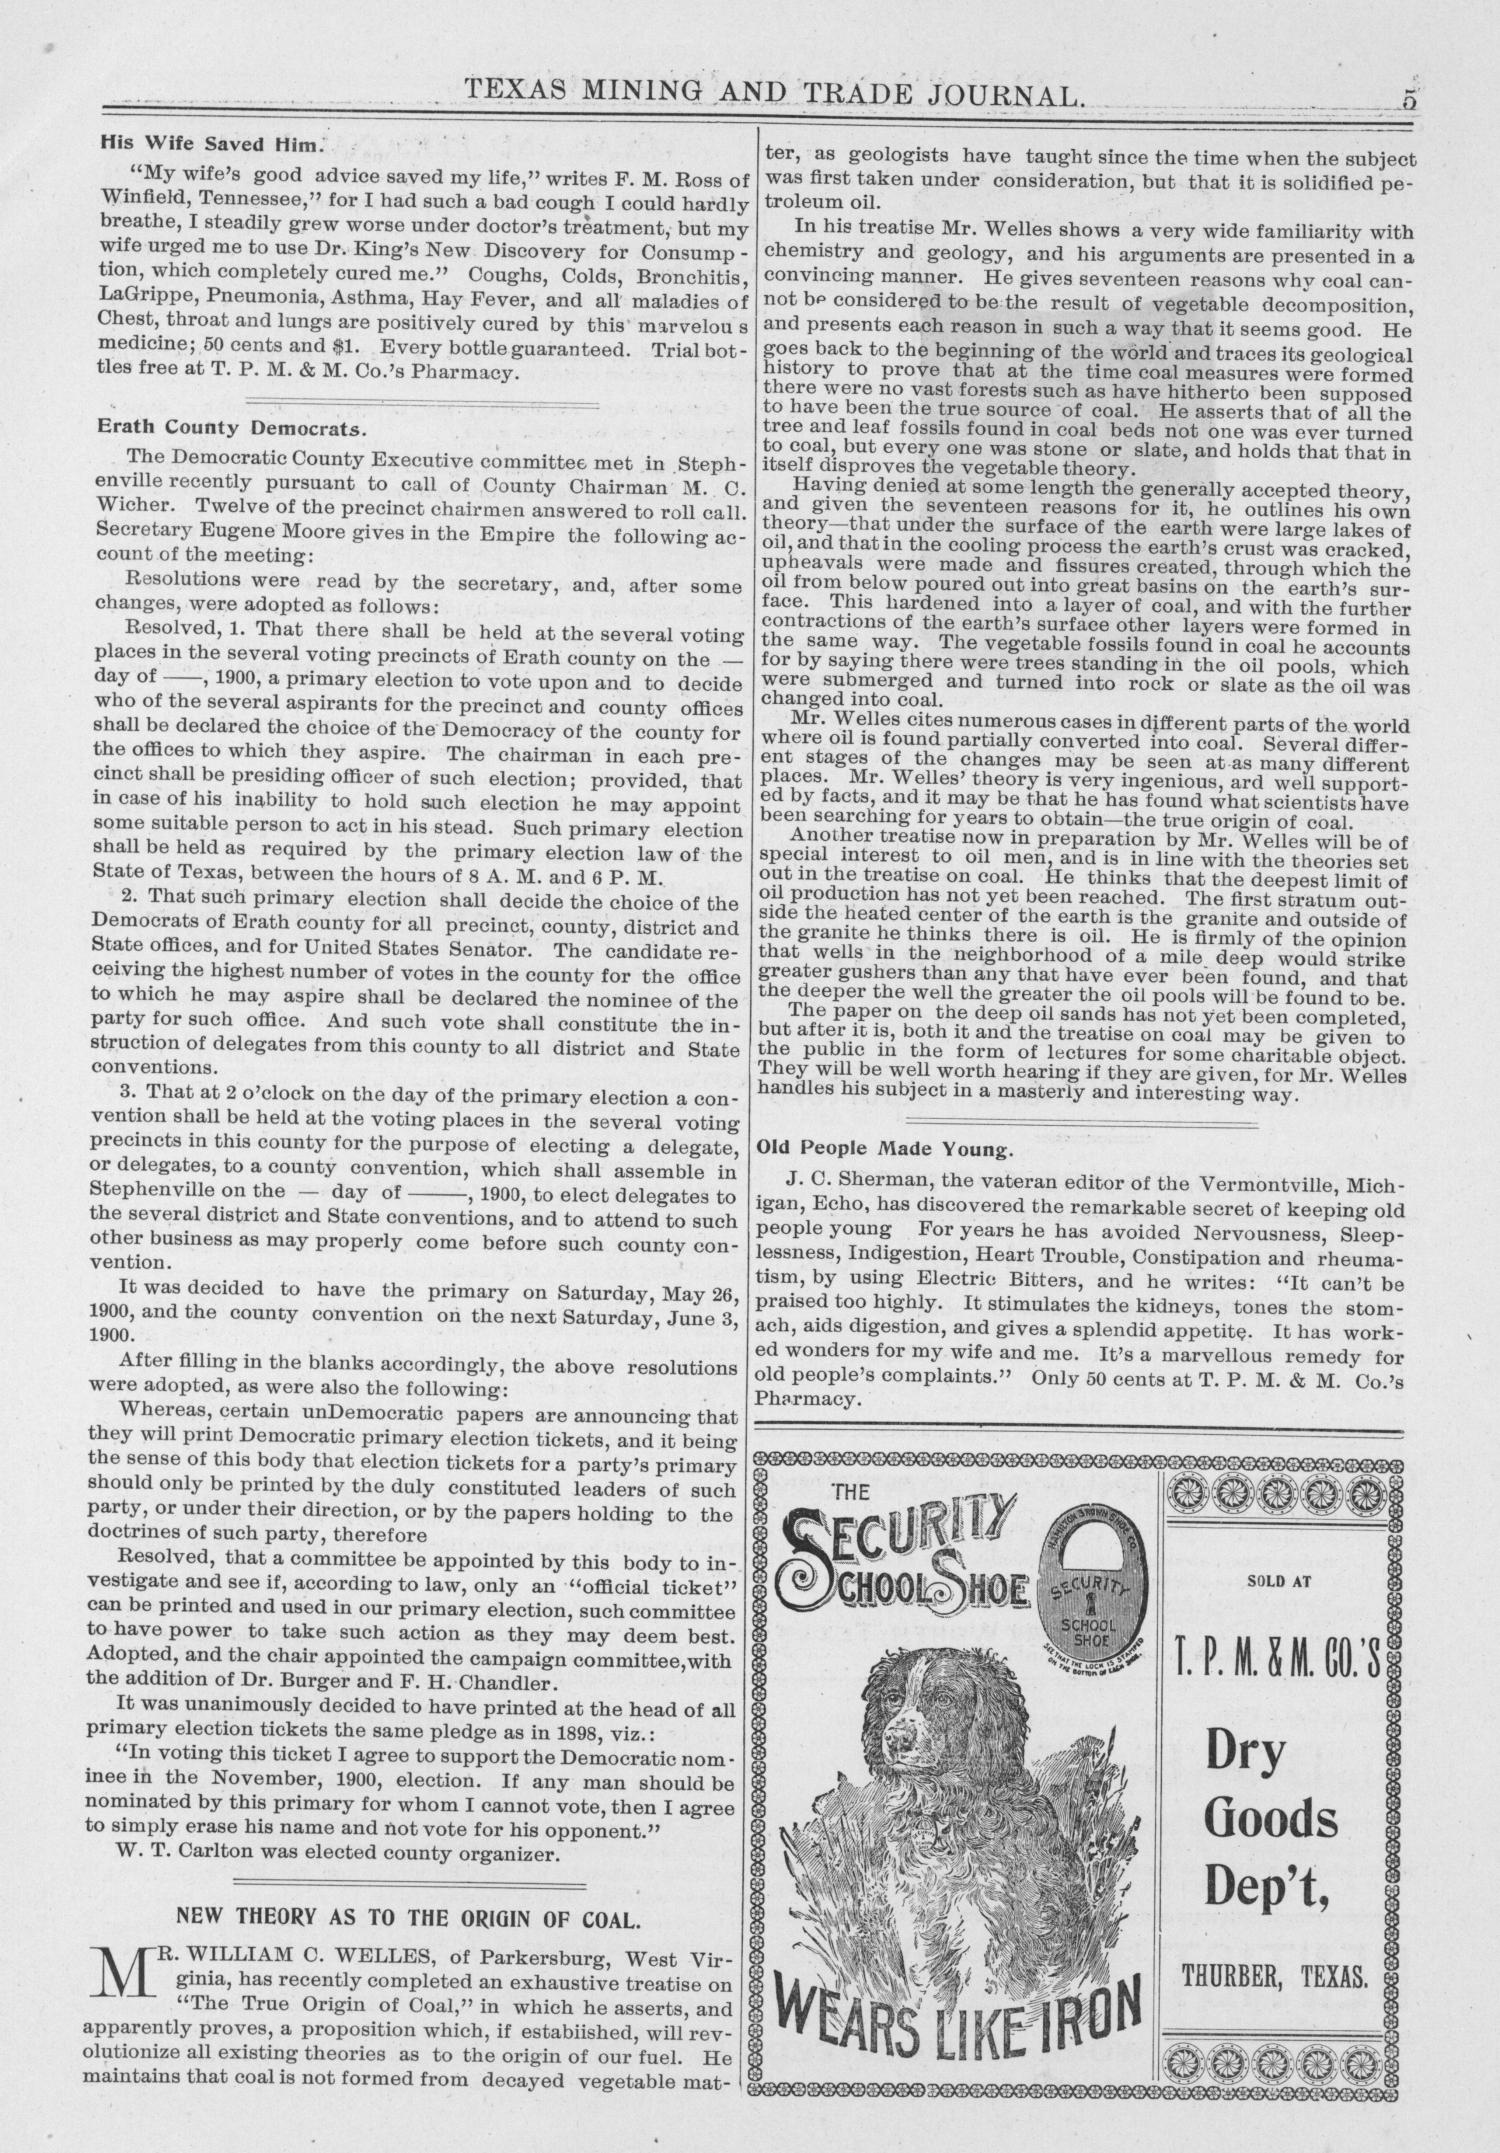 Texas Mining and Trade Journal, Volume 4, Number 28, Saturday, January 27, 1900
                                                
                                                    5
                                                